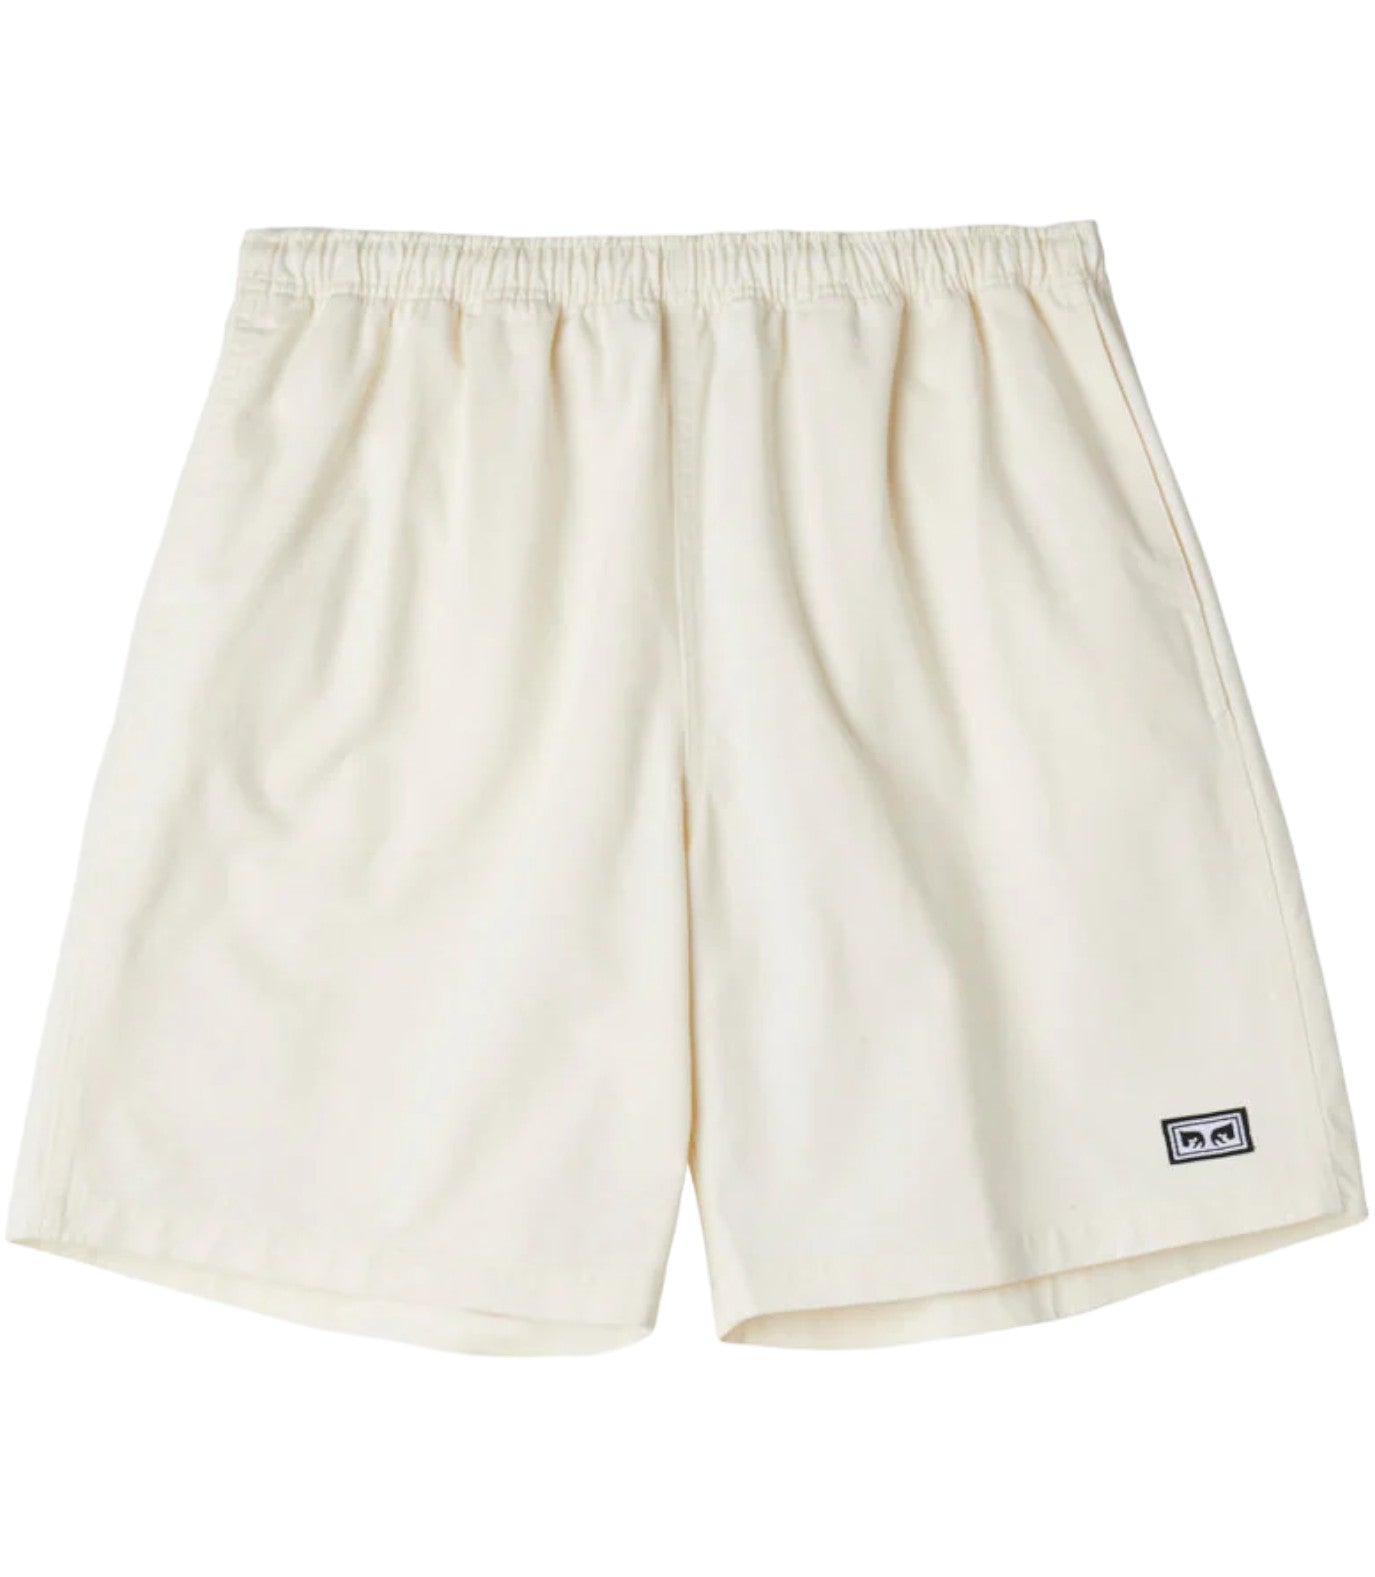 Obey uomo short easy relaxed twill 22MC0000090 UNBLEACHED